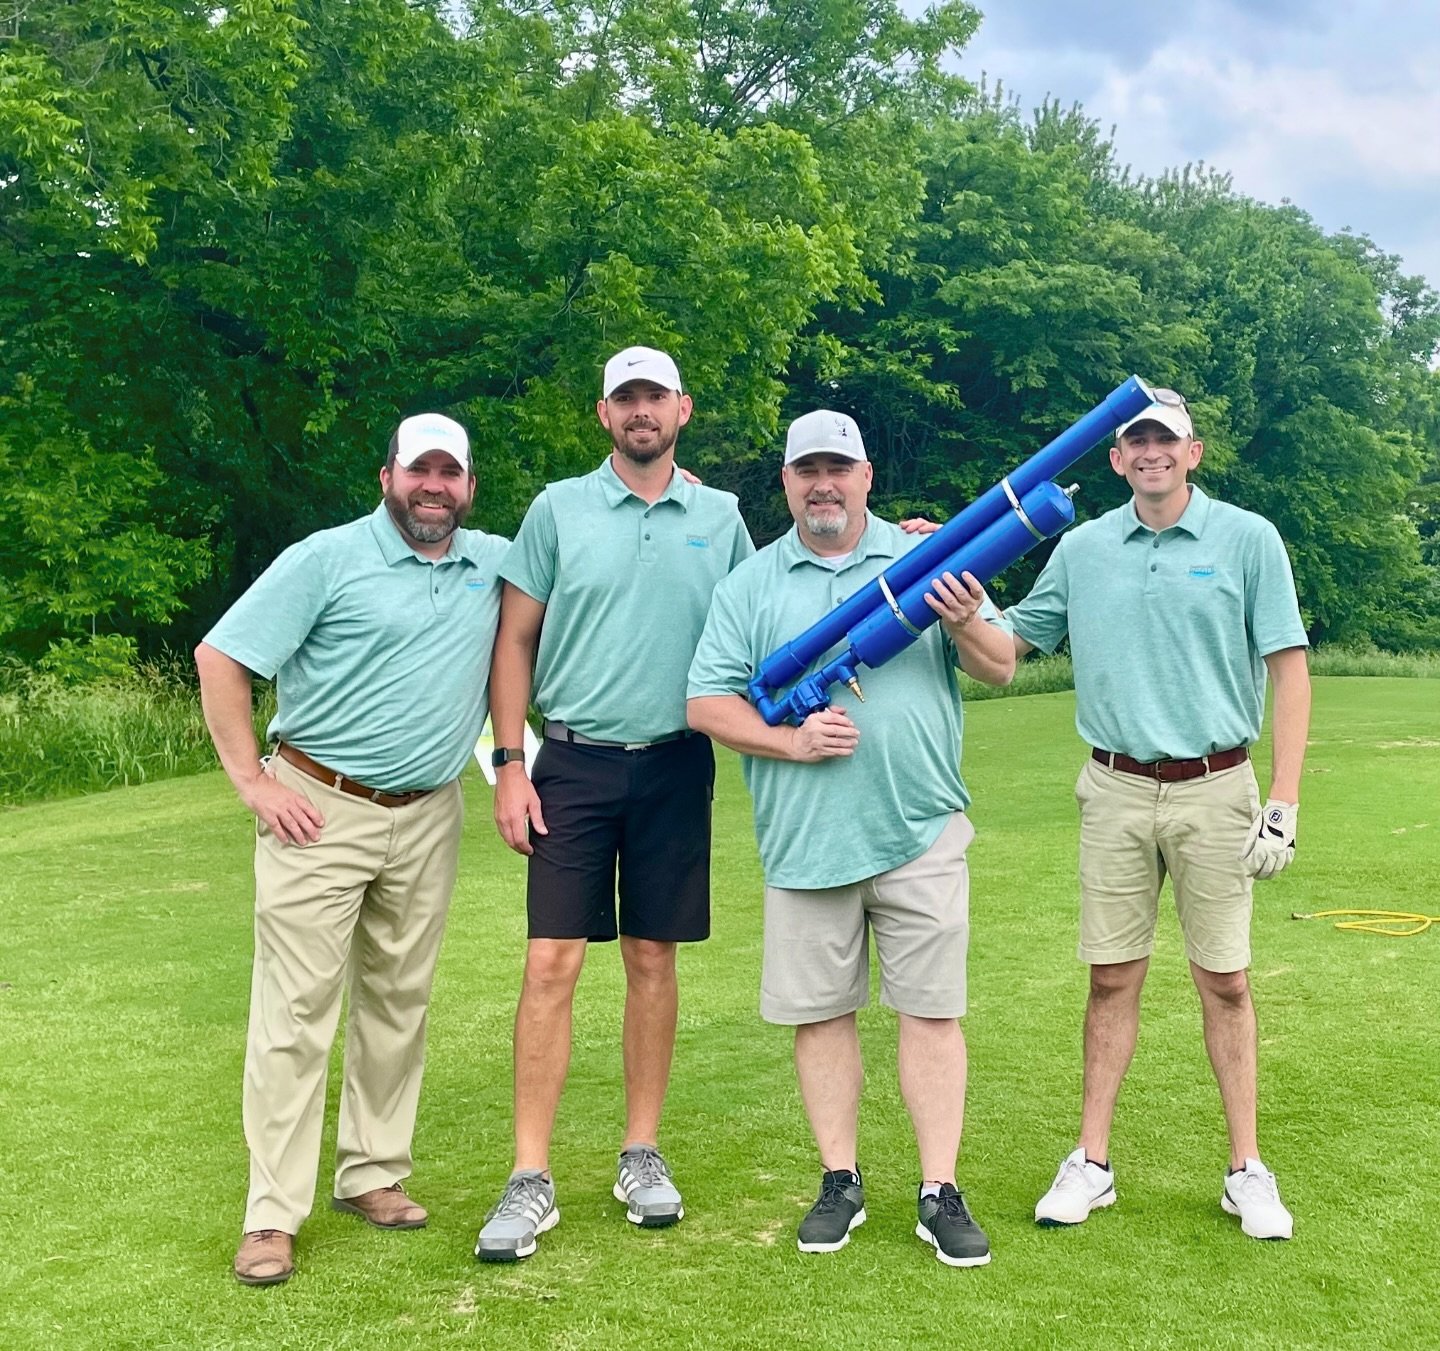 We had such a blast representing Canyon Oak Pools with some of our favorite clients at the @heritageranchgolf tournament in #mckinneytx this past weekend! ⛳️

It&rsquo;s an incredible thing to watch clients and homeowners become friends and neighbors